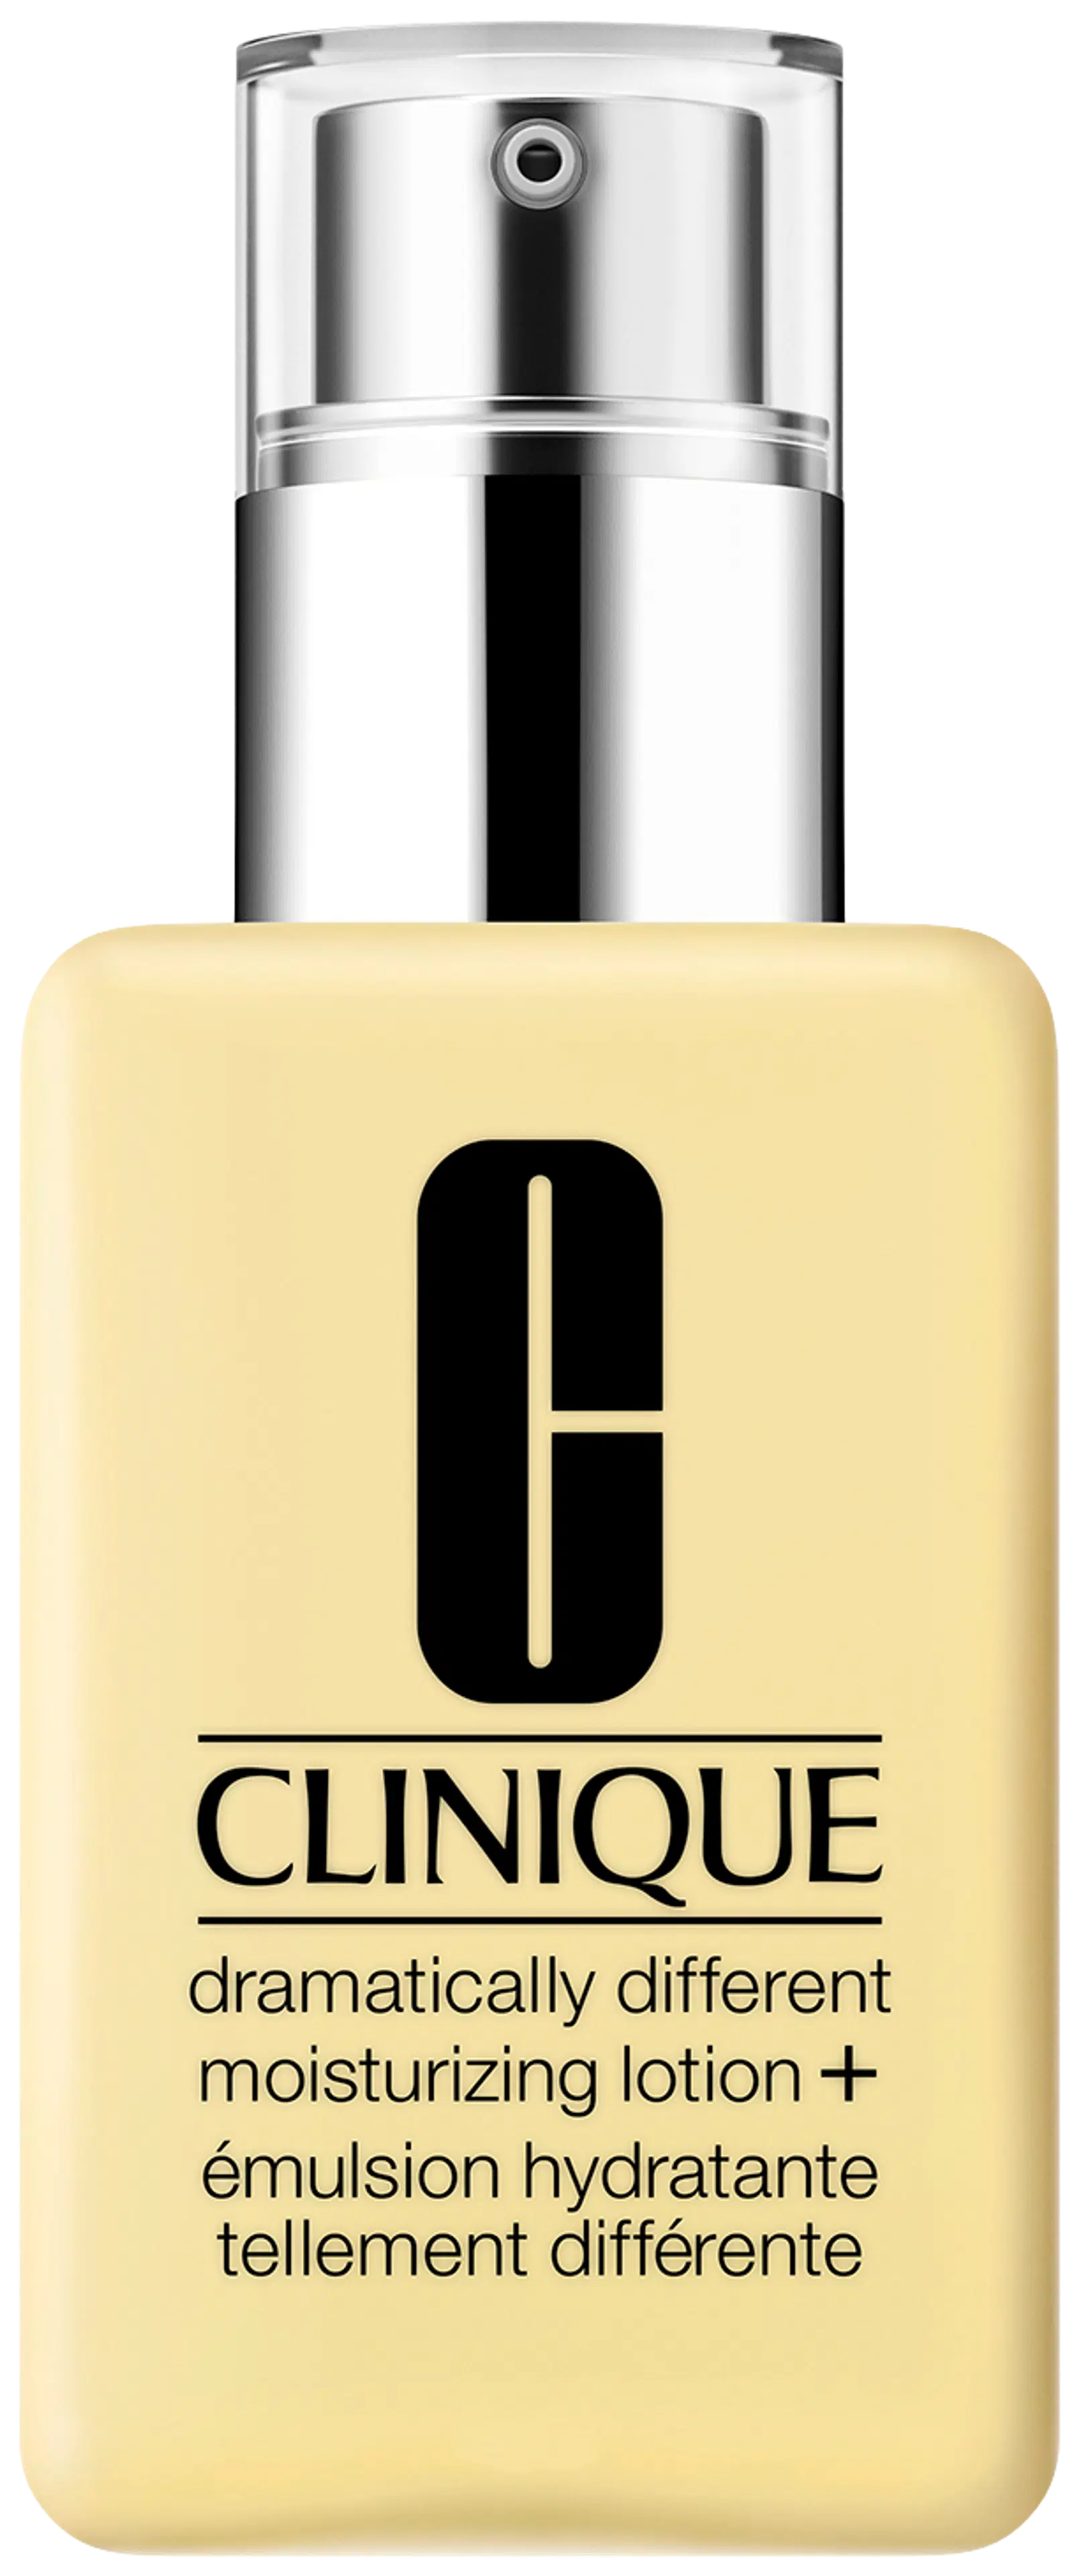 Clinique Dramatically Different Moisturizing Lotion+ kosteusemulsio 125 ml